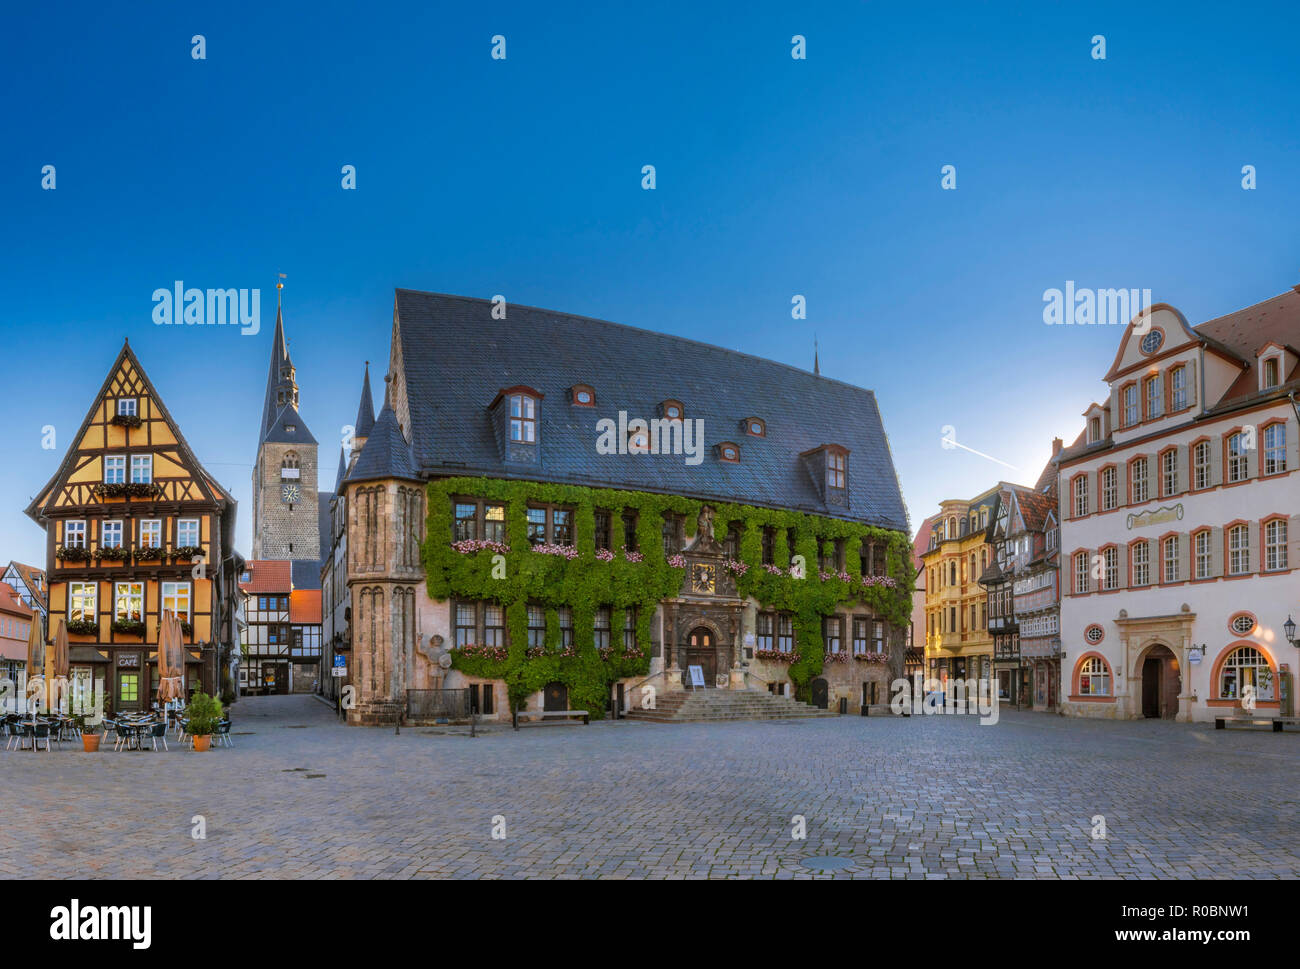 Cafe on the market square and town hall in the UNESCO World Heritage city of Quedlinburg, Saxony-Anhalt, Germany, Europe Stock Photo